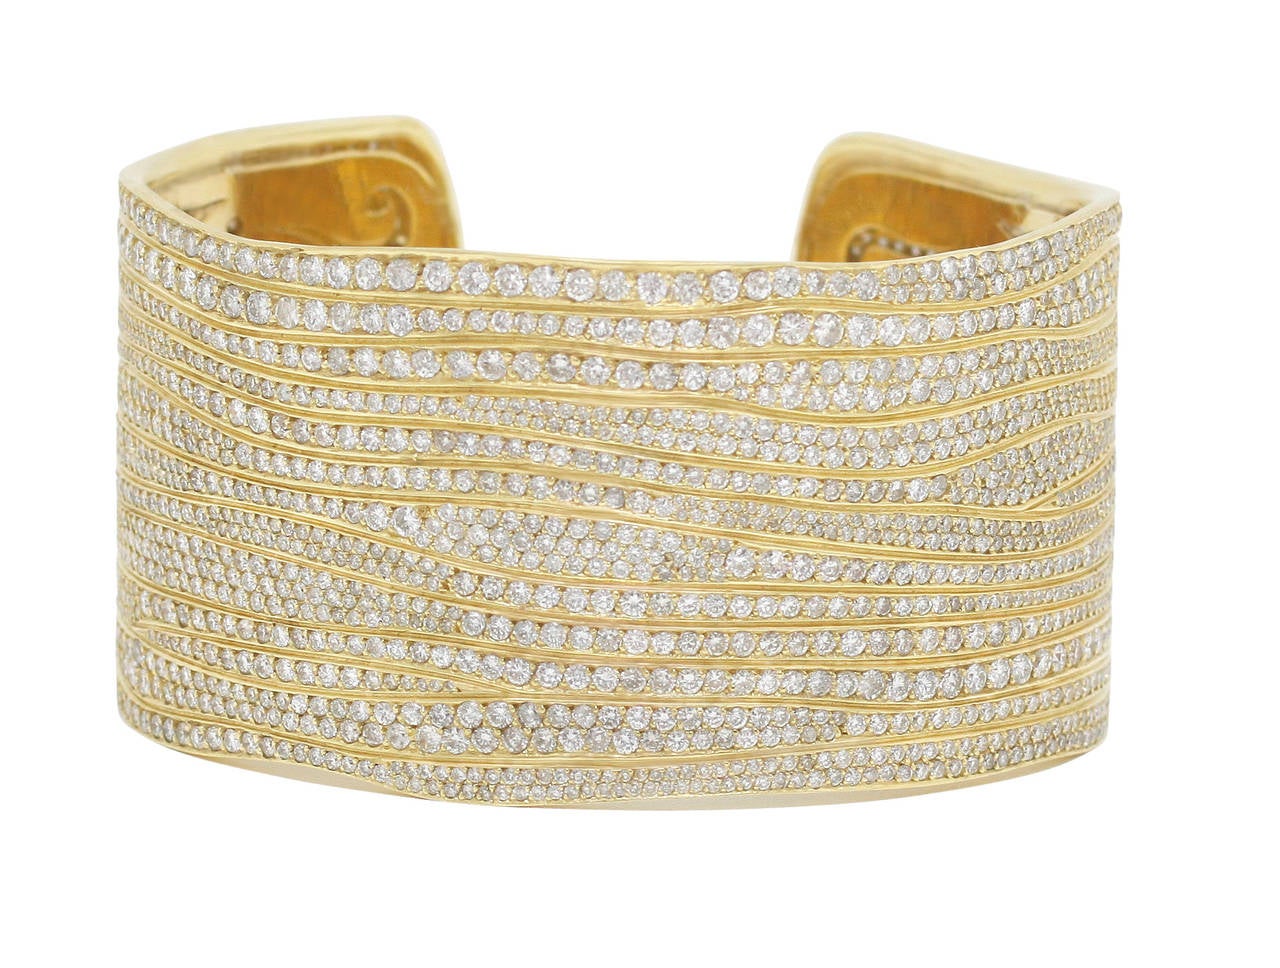 This Burdeen's Jewelry dazzling 18K Yellow Gold & Diamond Cuff Bracelet, has over 2,000 brilliant round white diamonds, that are handset into this delicate designed exterior of the cuff. The interior of the cuff bracelet continues the moving bright